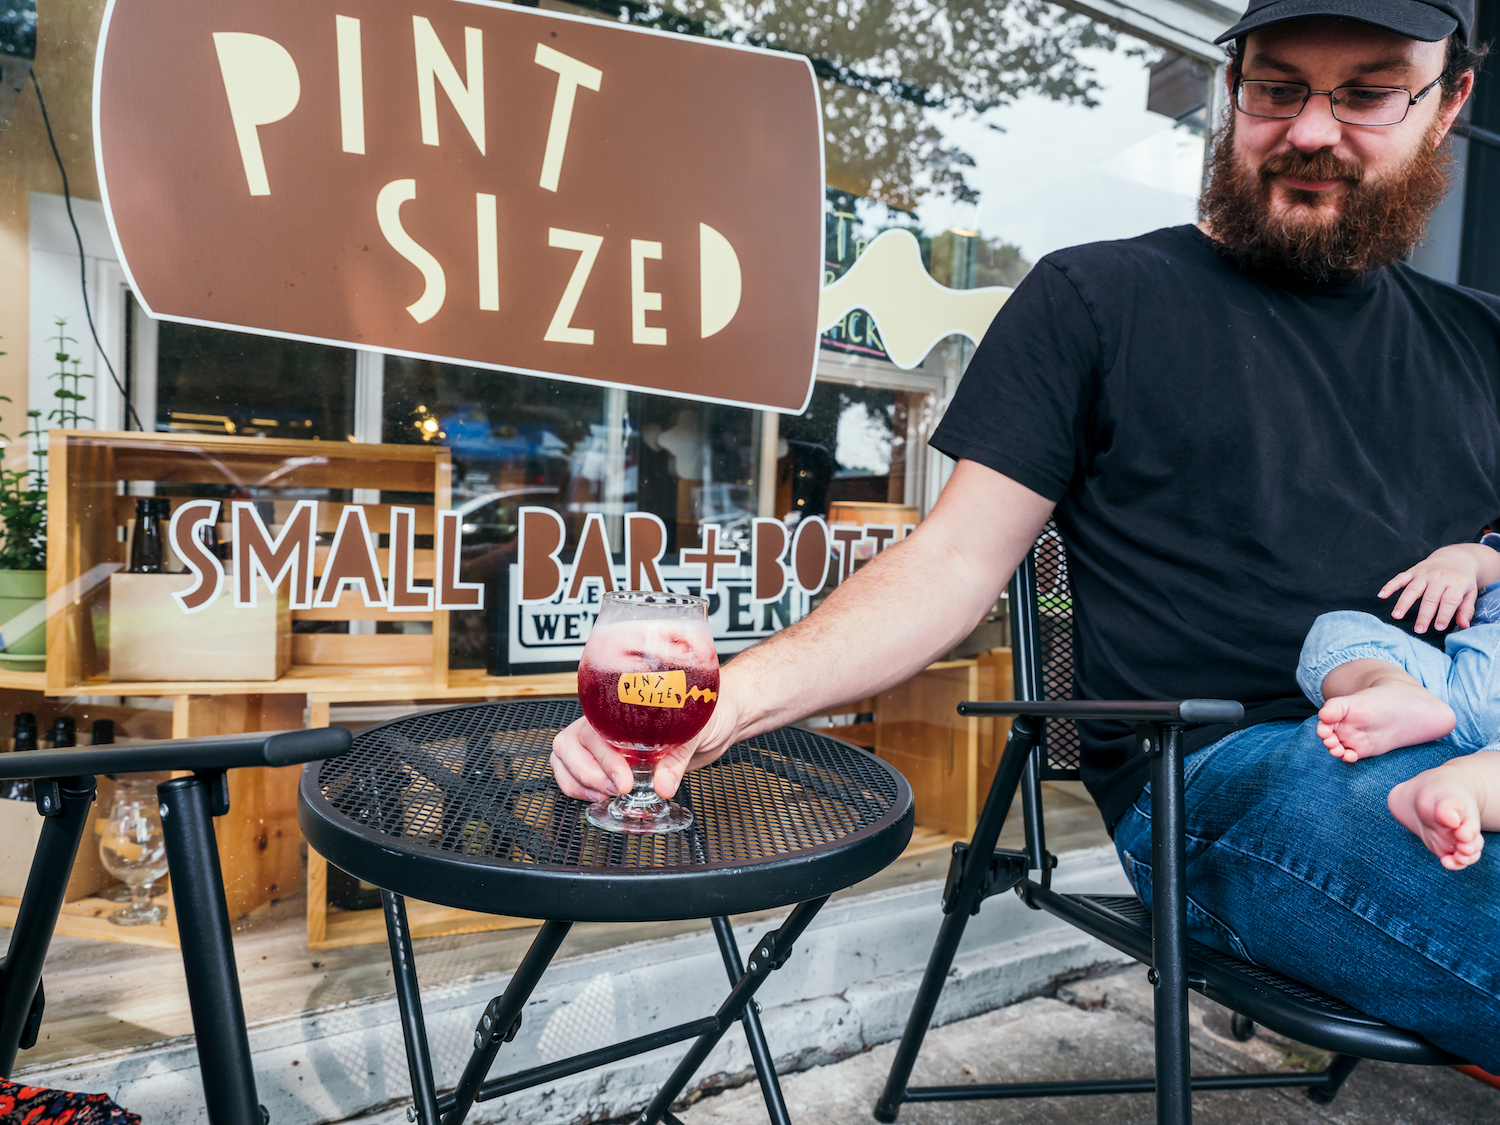 Pint Sized is a beer store in Albany and Saratoga Springs that offers 12 drafts, 100 cans and bottles.